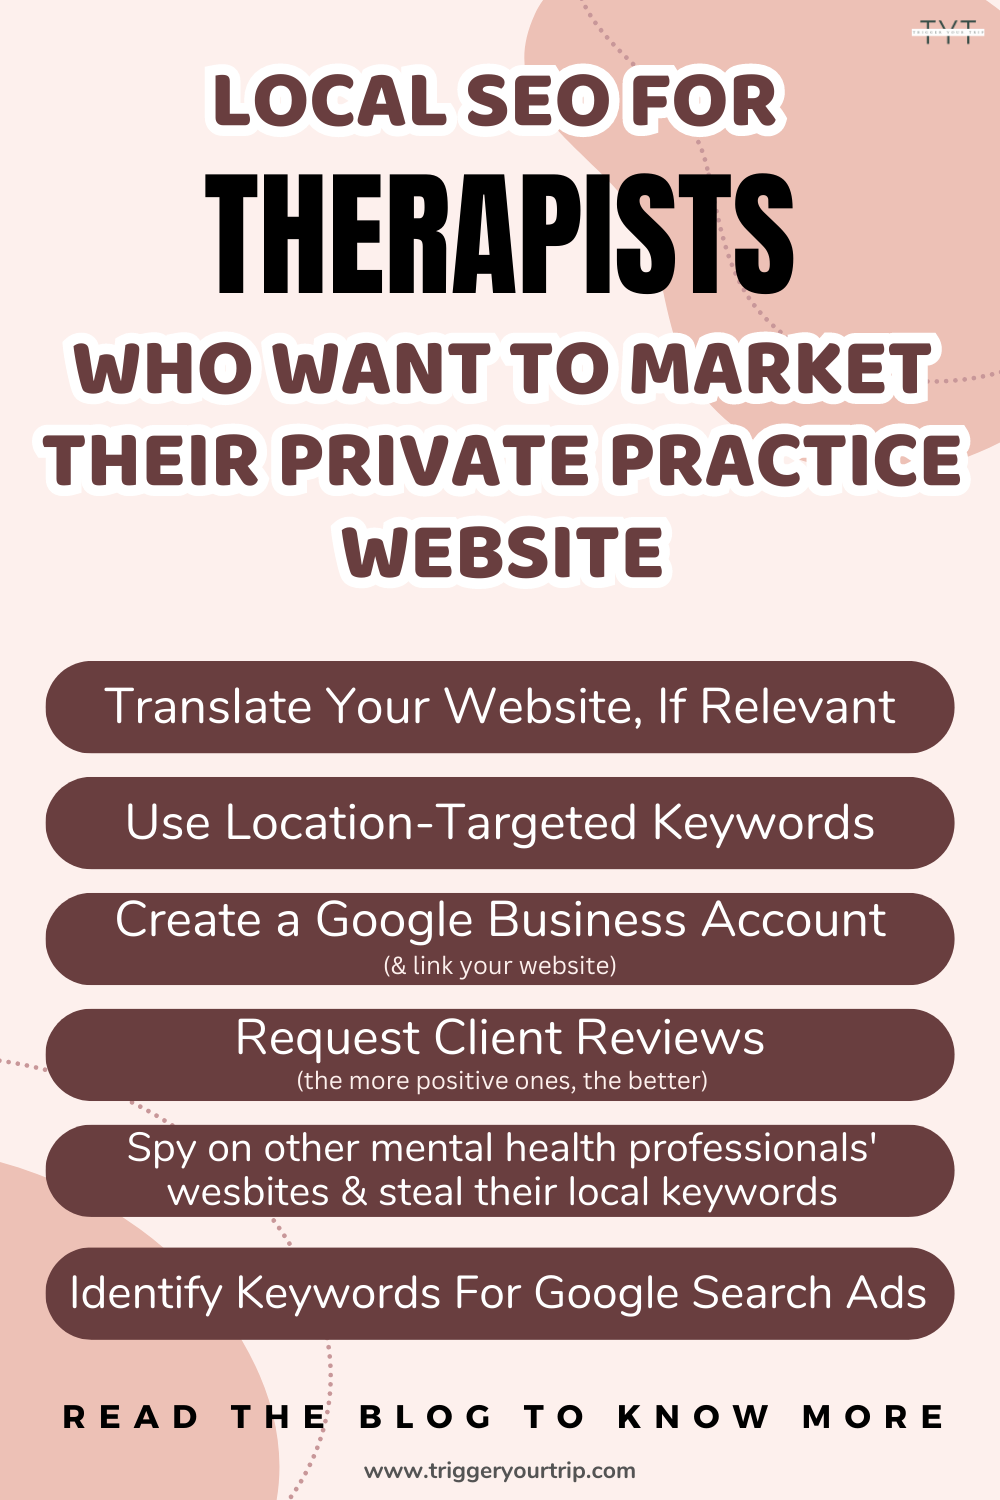 local therapist seo, business listing tips, yellow pages and free traffic